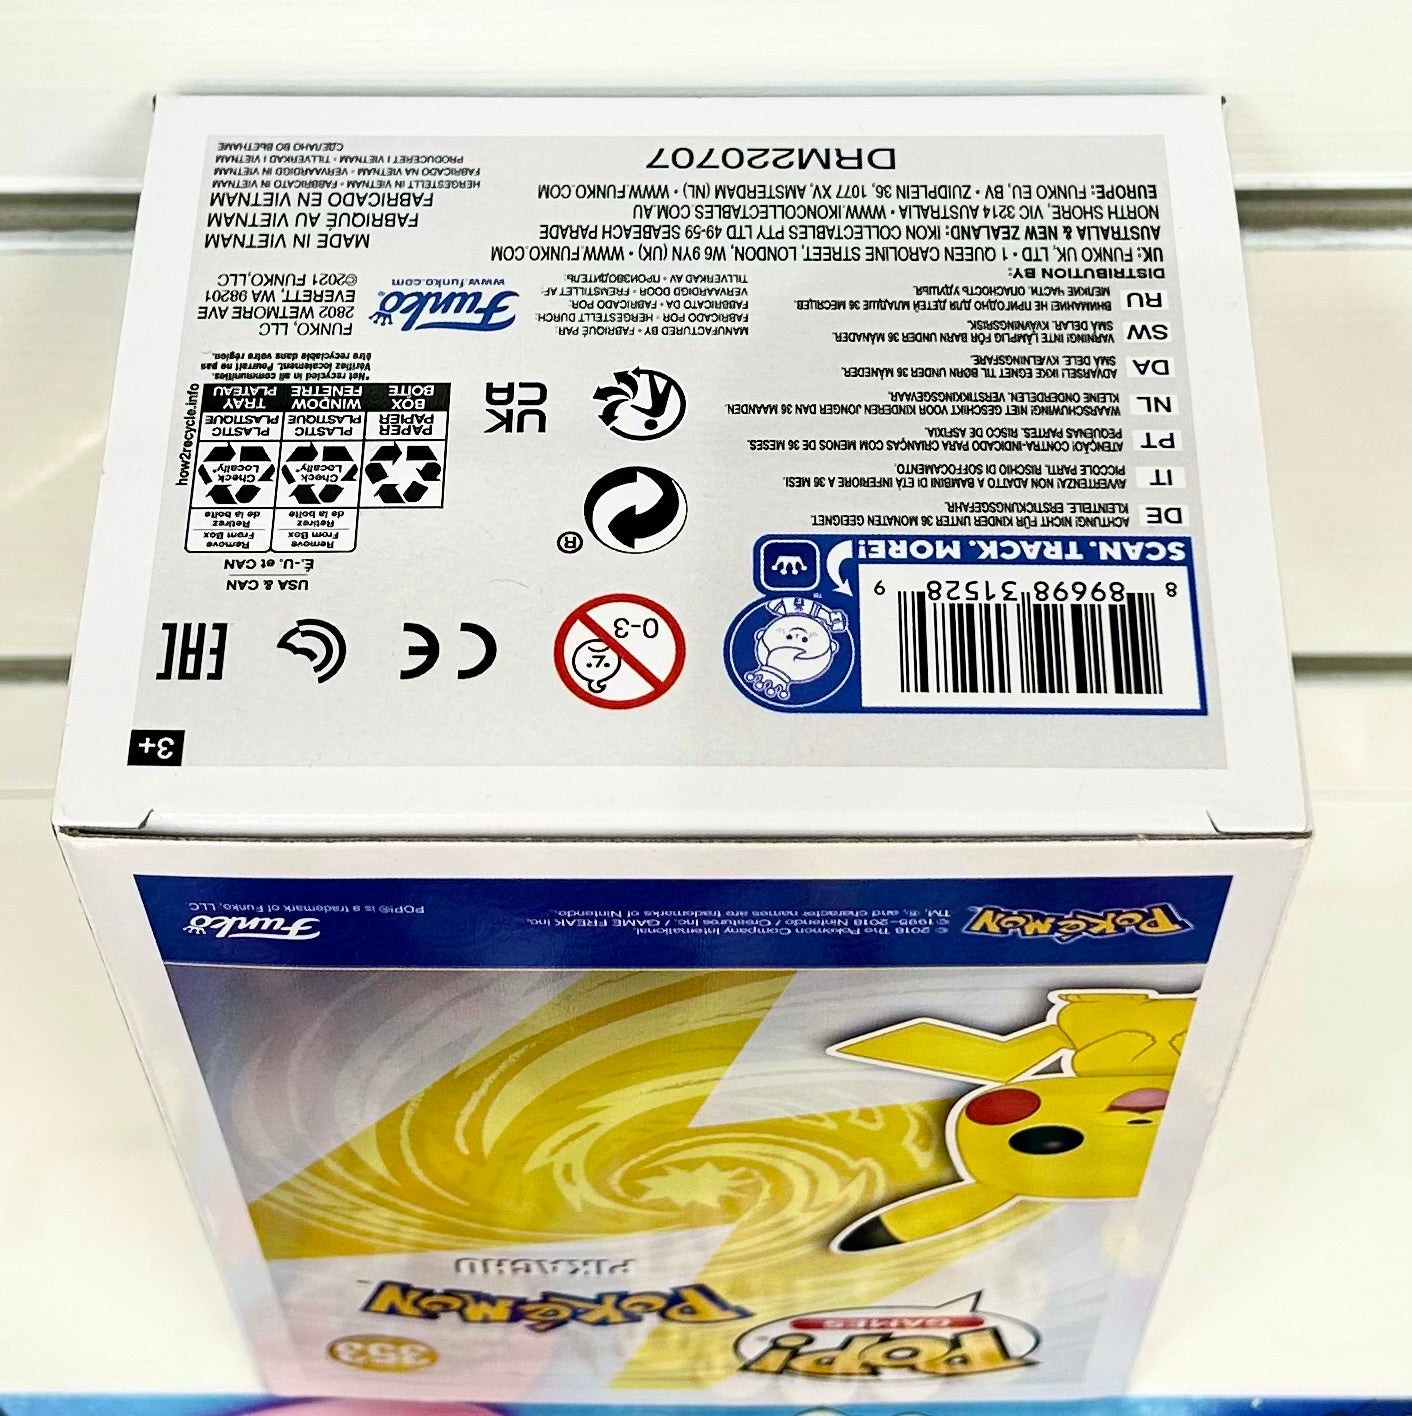 Pokemon Pikachu Clem So Autographed Special Edition 353 Funko POP! with Triple Layer Authenticity